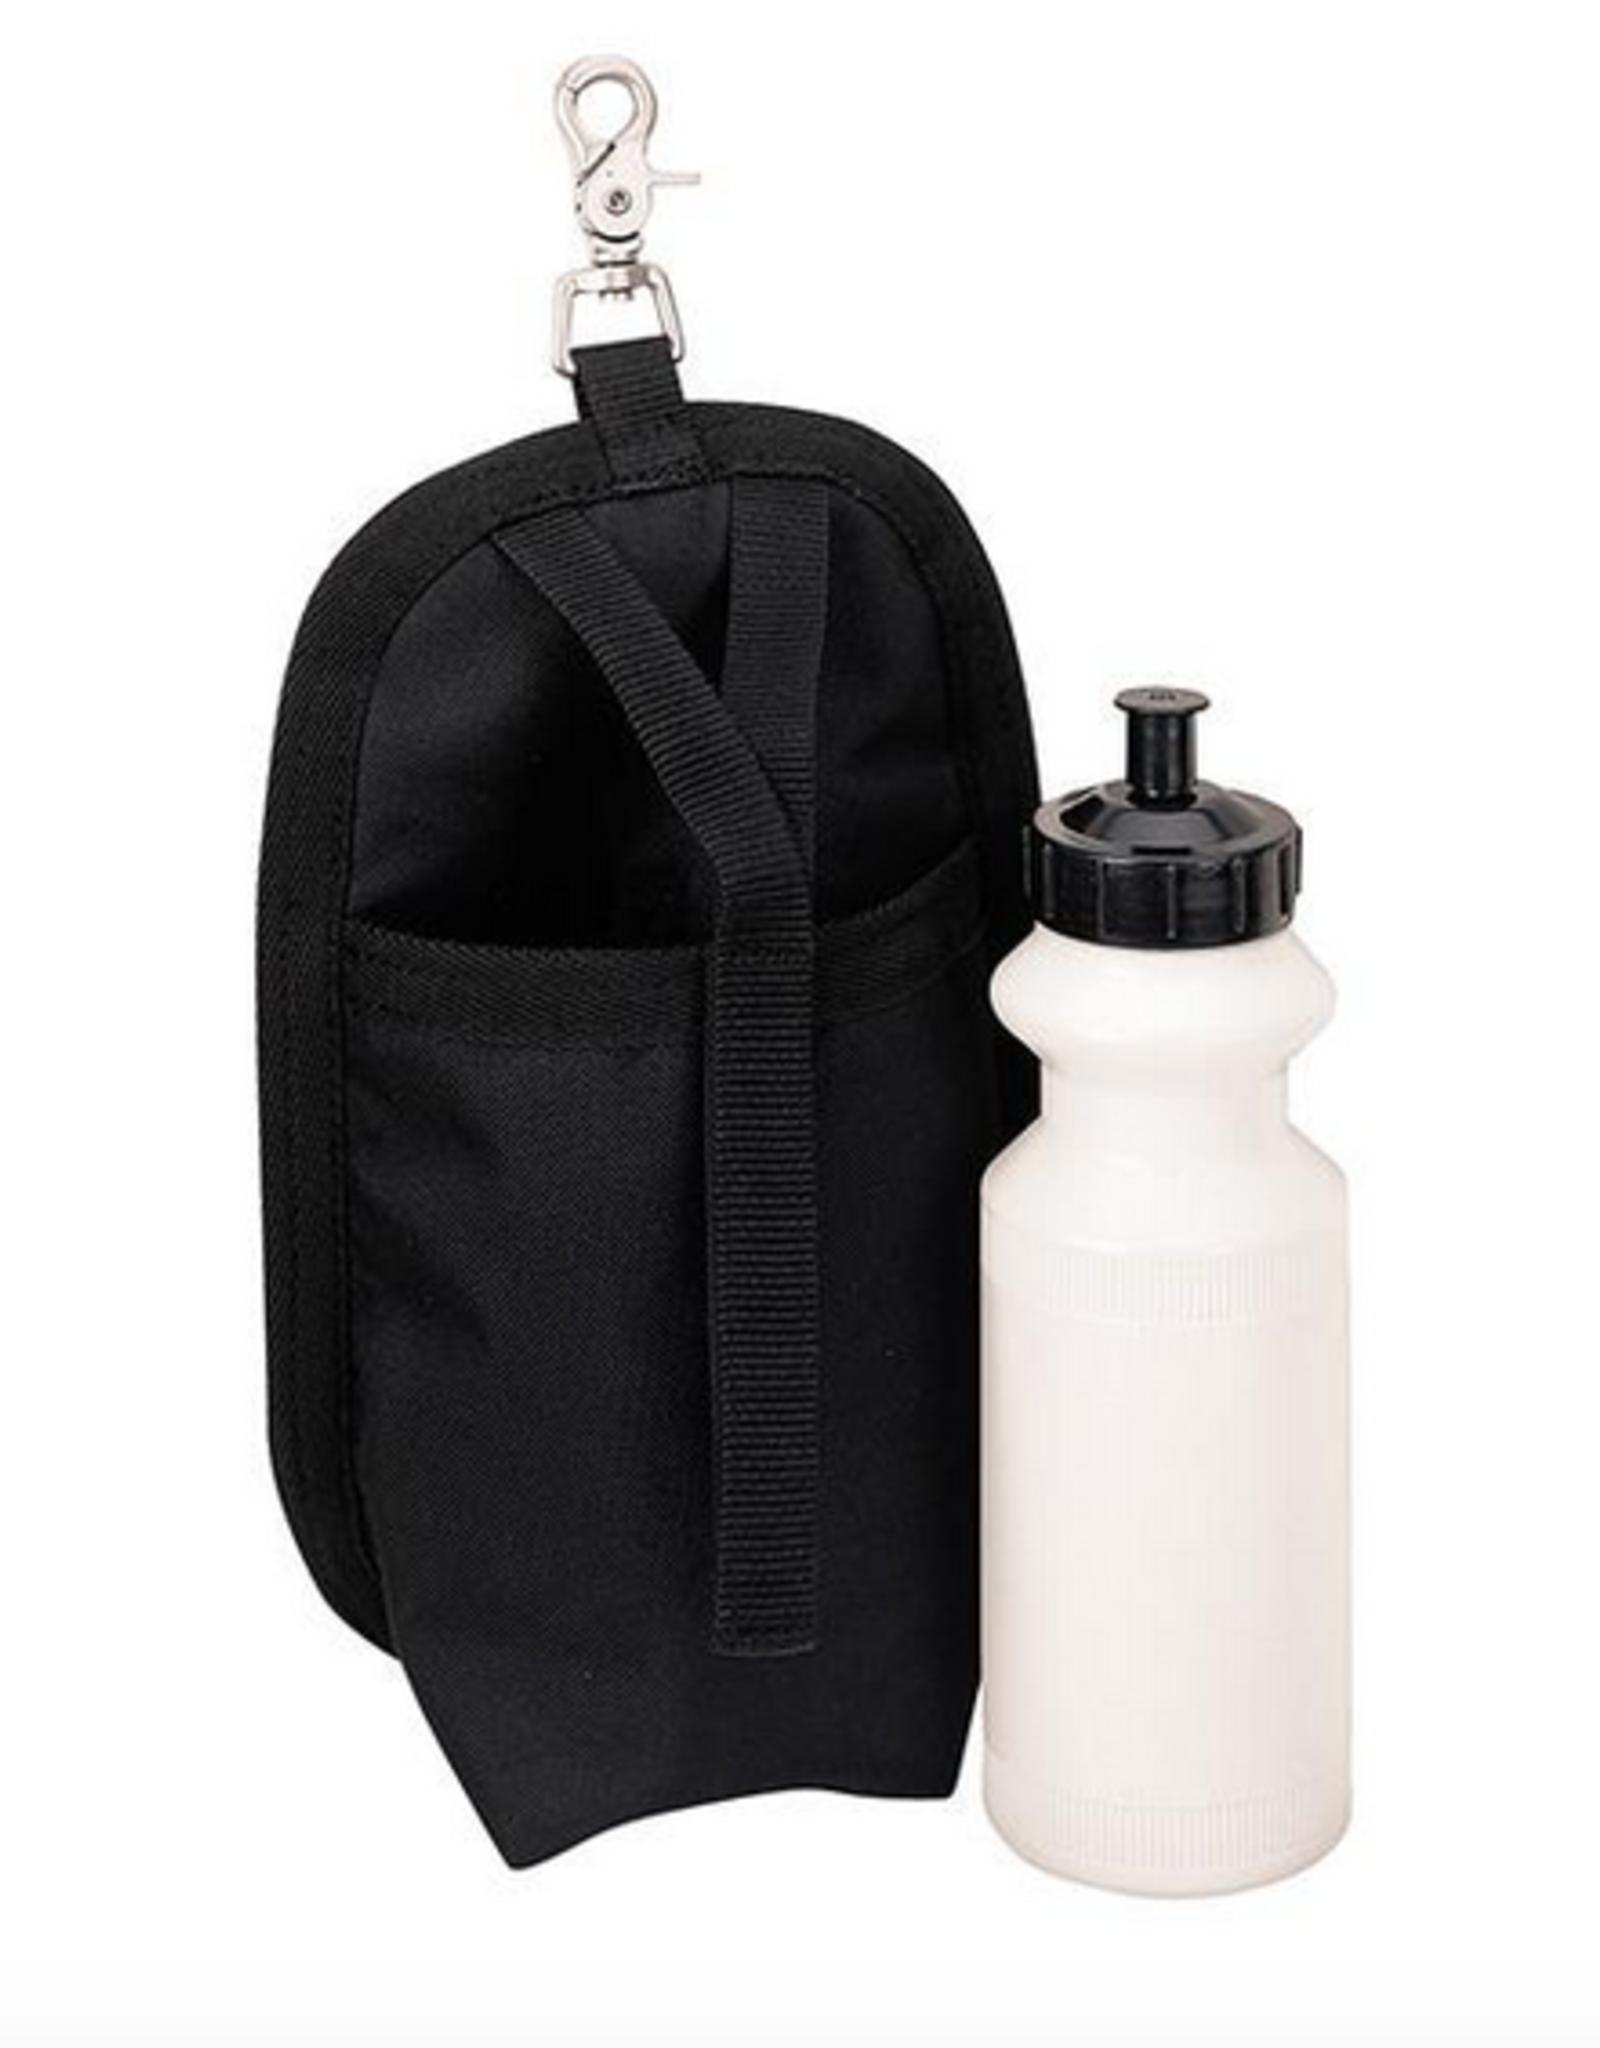 Weaver Clip On Holster with Water Bottle